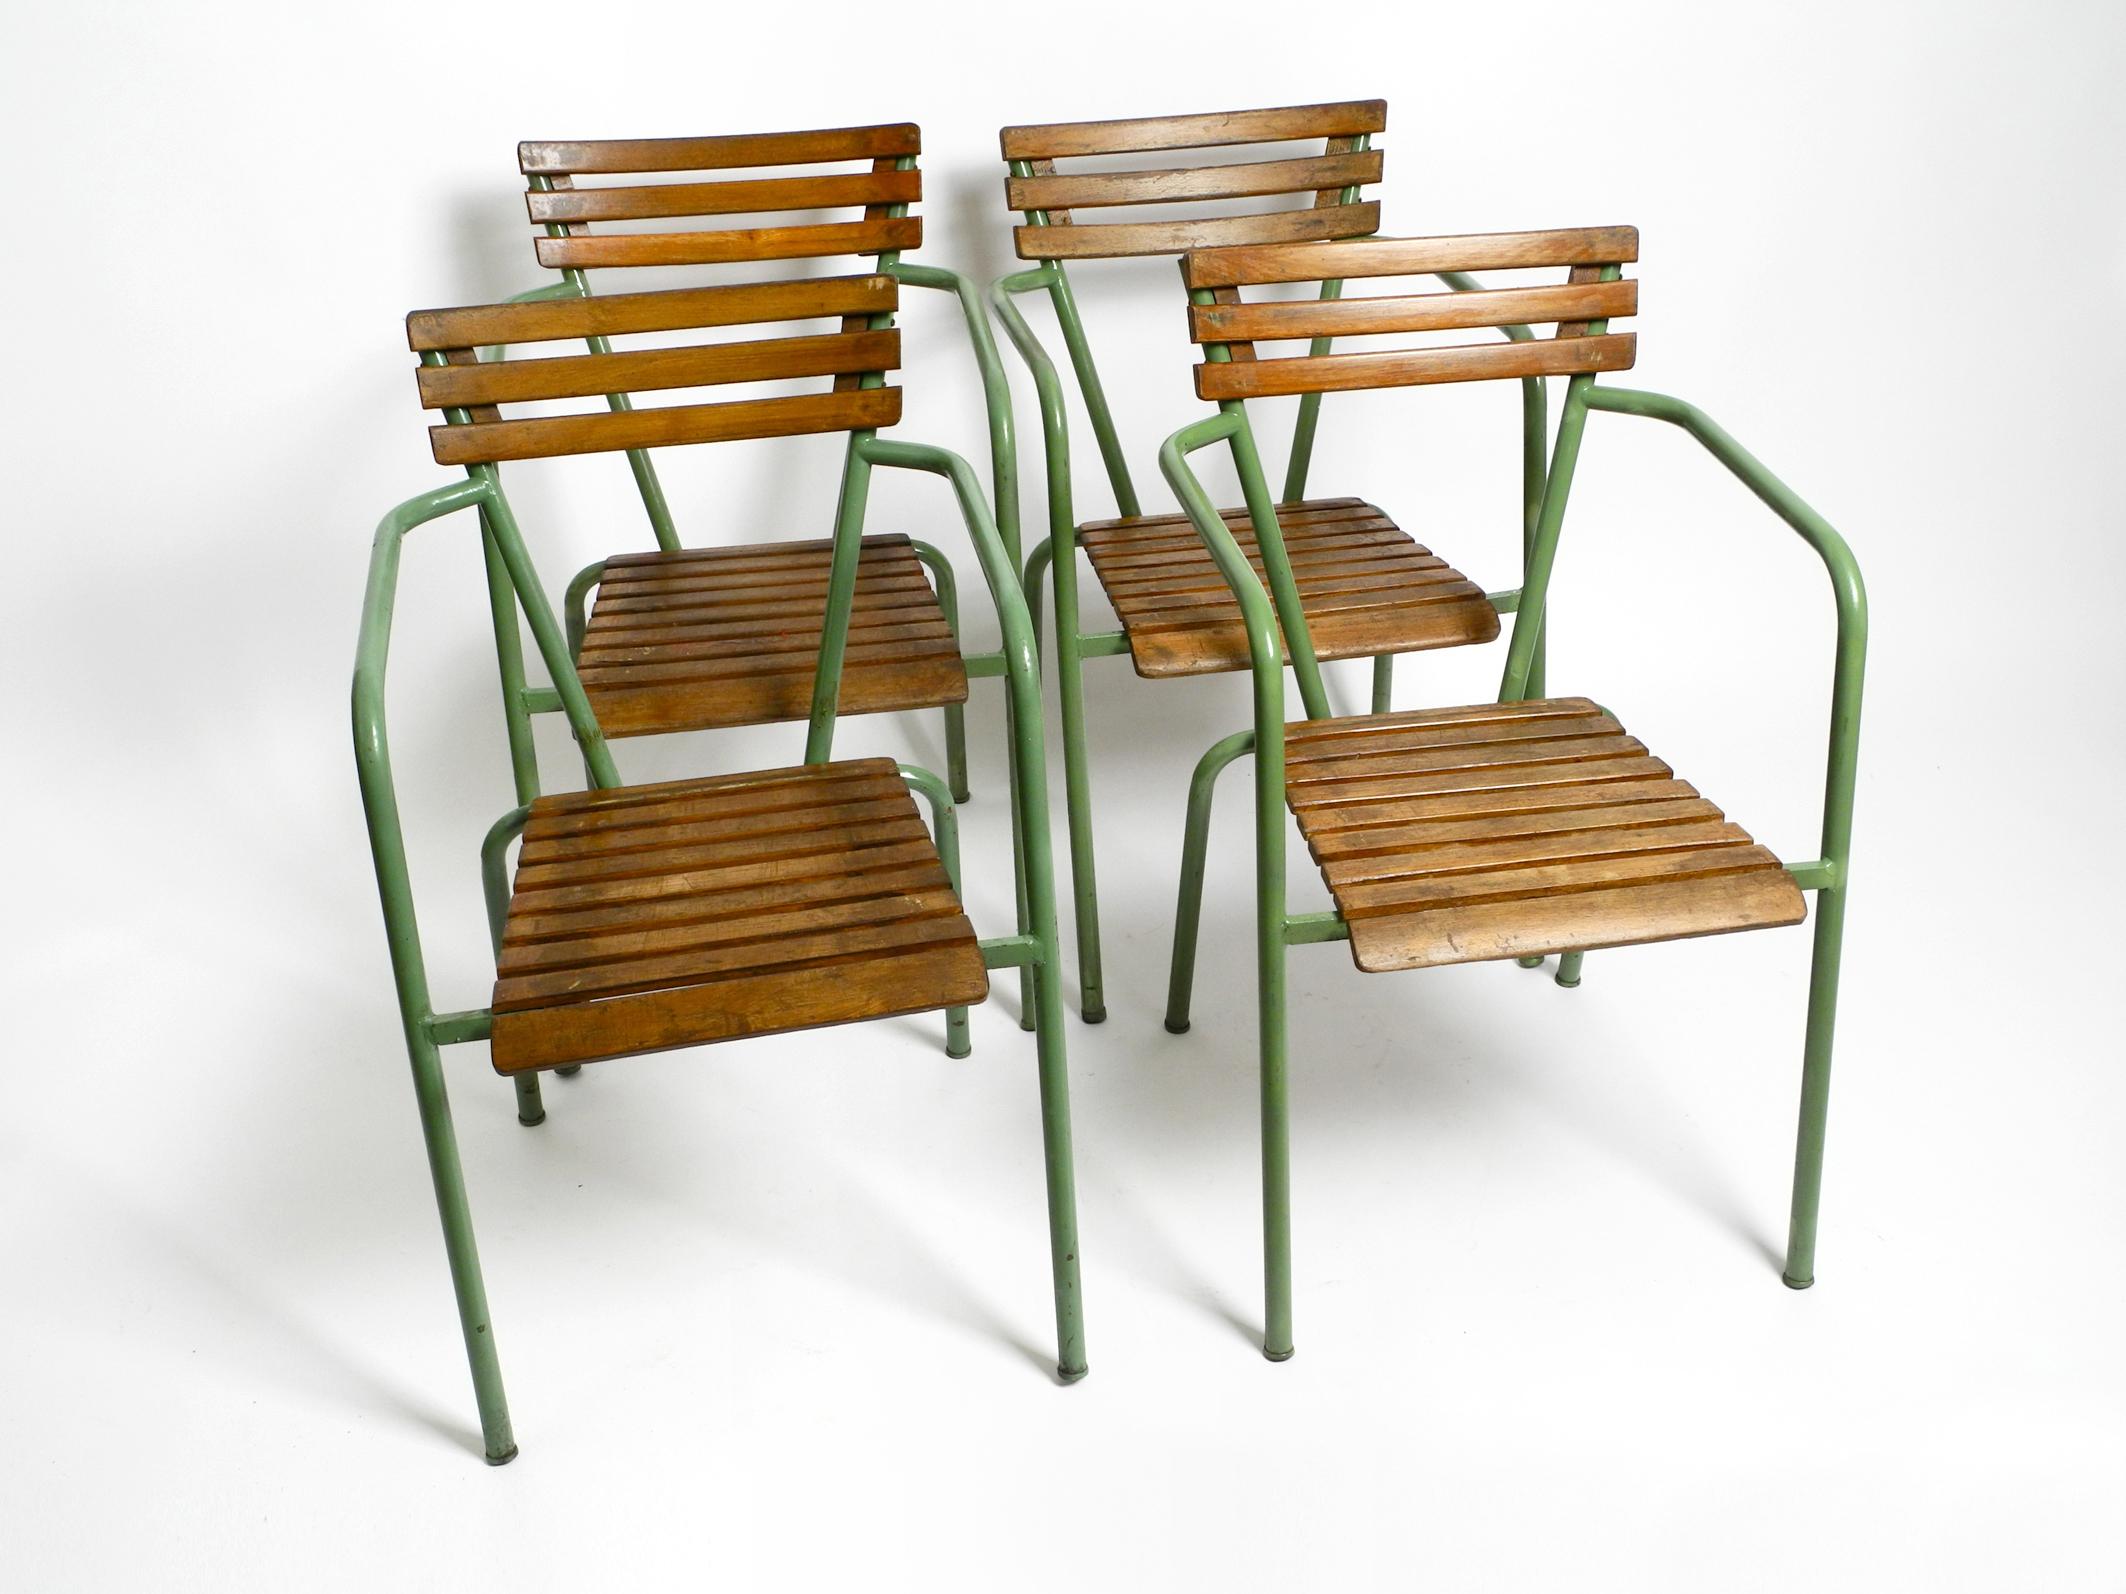 Four beautiful stackable Mid Century bistro armchairs.
Beautiful Italian design of the 1950s.
Metal tube frame. Backrest and seat are made of wood.
According to the previous owner, the frames were repainted once in the original color.
Except for the